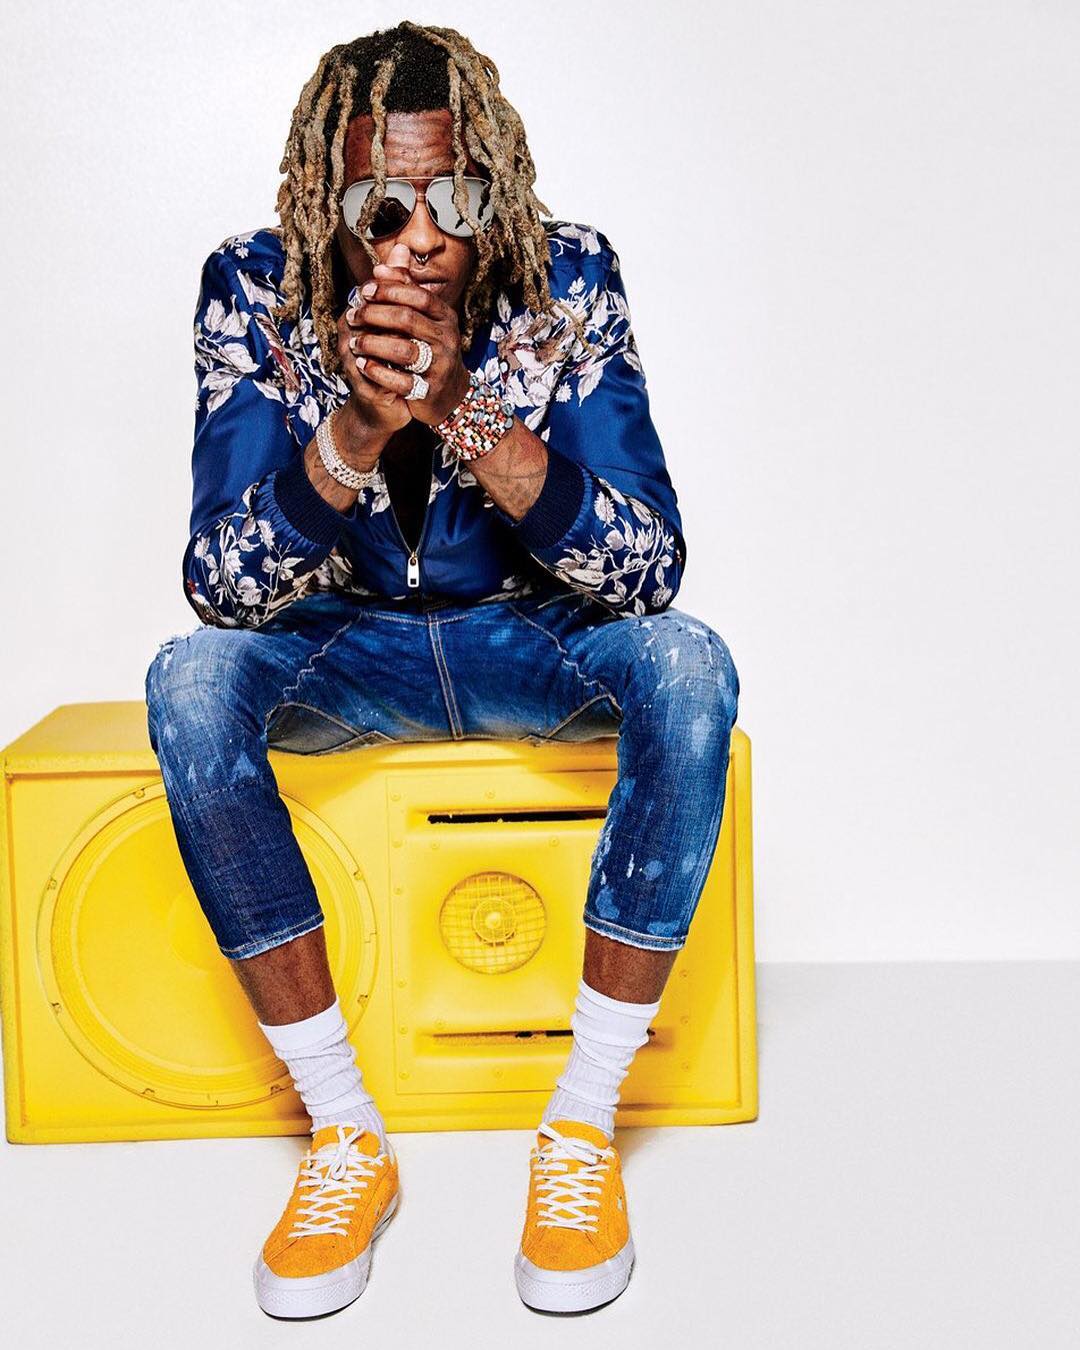 SPOTTED: Young Thug In Dolce & Gabbana Jacket And Converse Sneakers For GQ Magazine